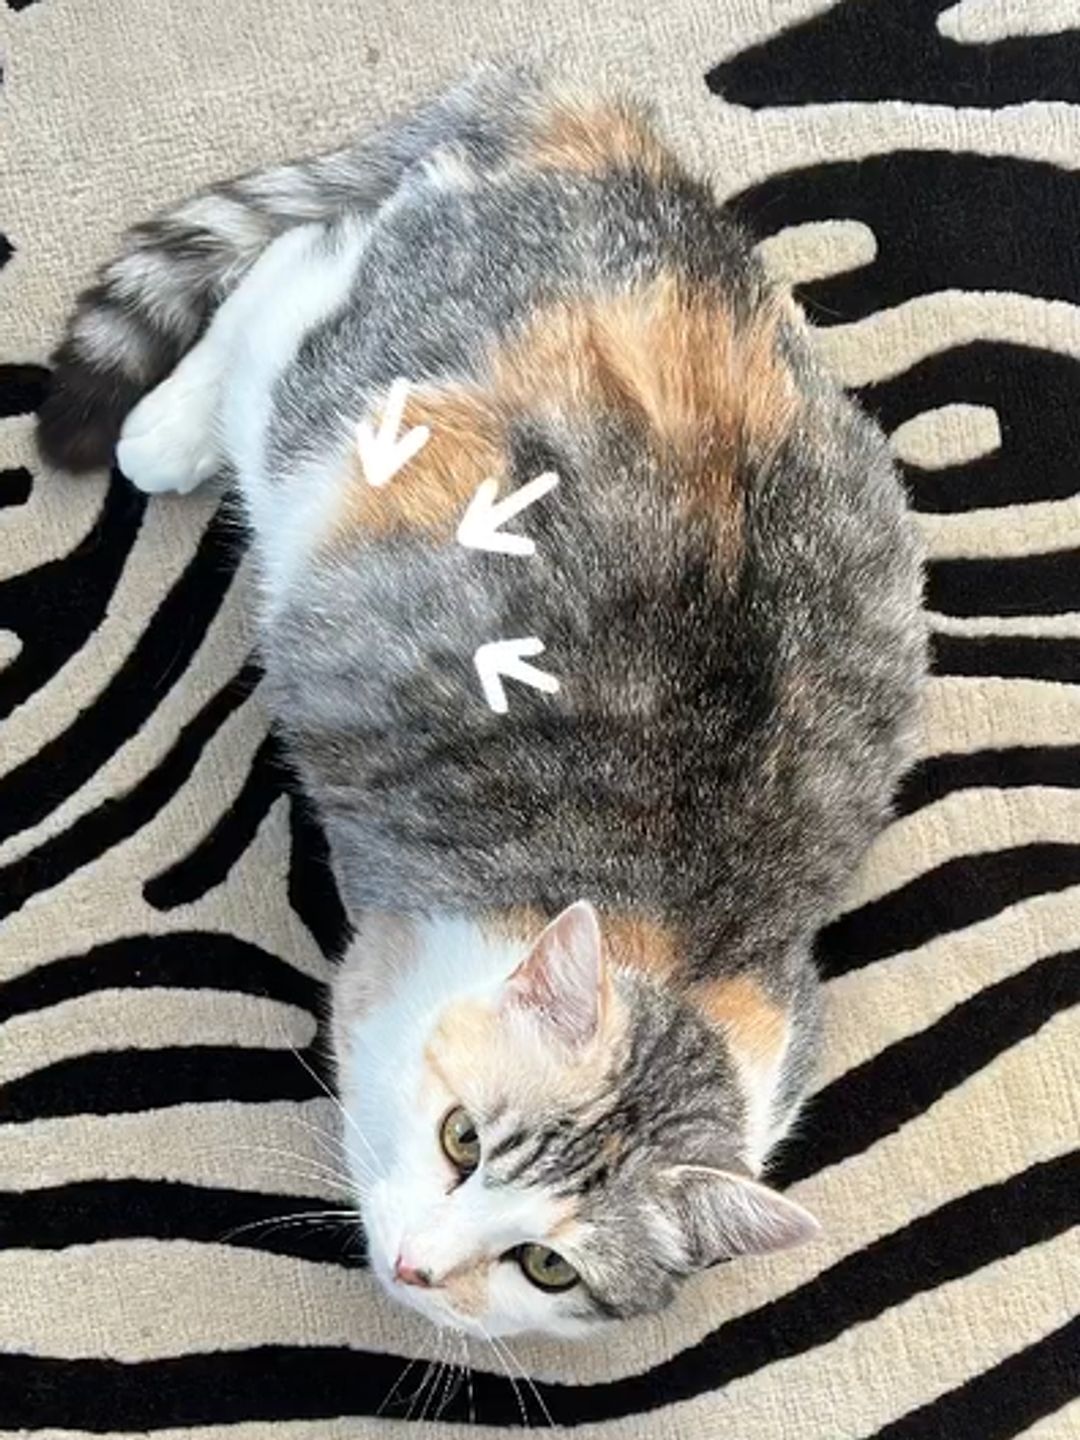 A pregnant calico cat with arrows pointing at its bulging belly